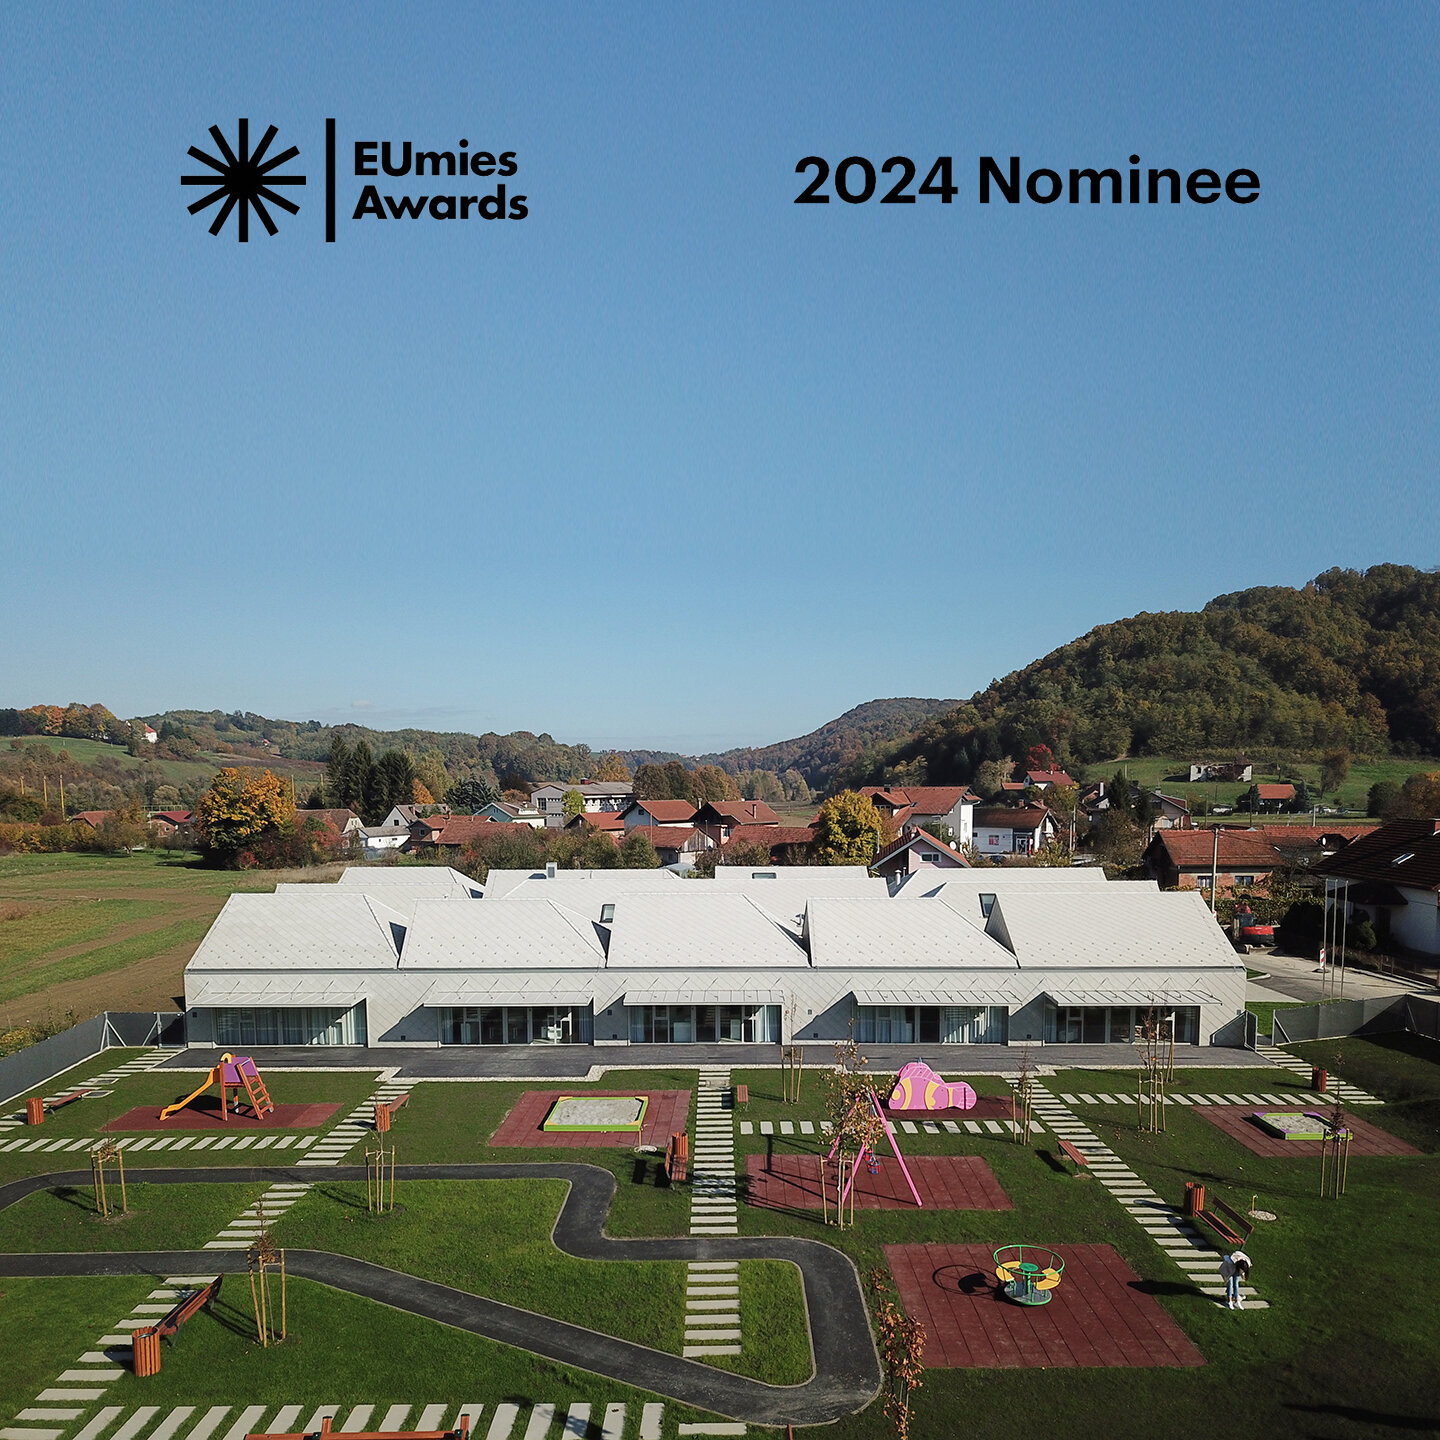 We are honoured to announce that our project Kindergarten Gornja Stubica has been nominated for 2024 European Union Prize for Contemporary Architecture / 
Mies van der Rohe Awards!

Photo: @jure_zi 
#EUmiesAwards2024 #Architecture #Emerging #Nominees